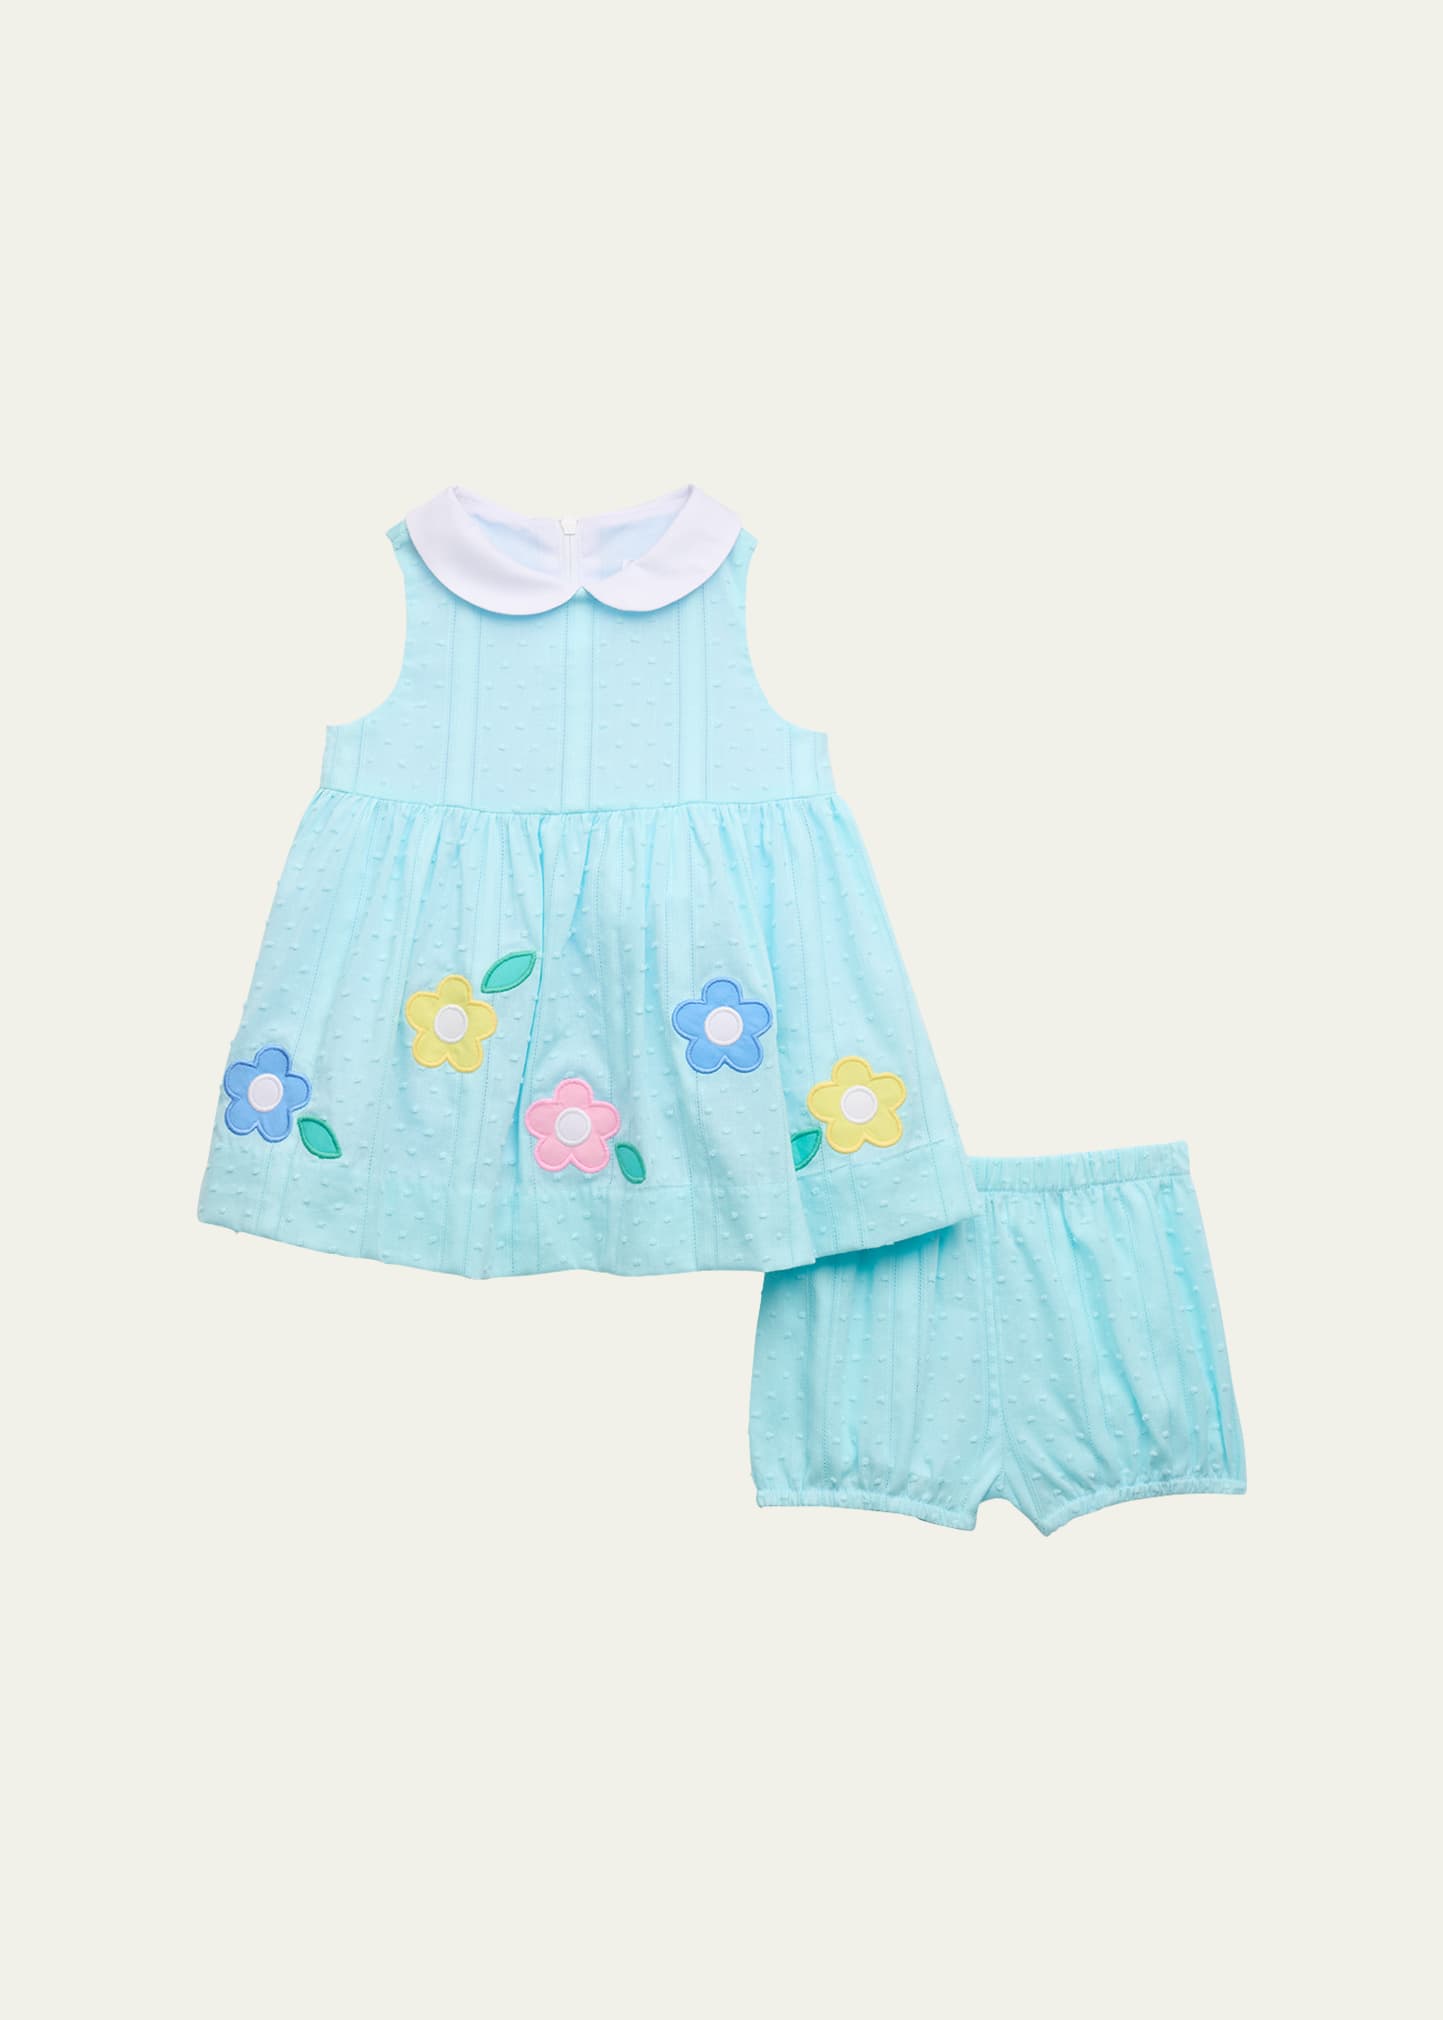 Girl's Flower Appliqué Swiss Dot Dress with Bloomers, Size 3M-24M